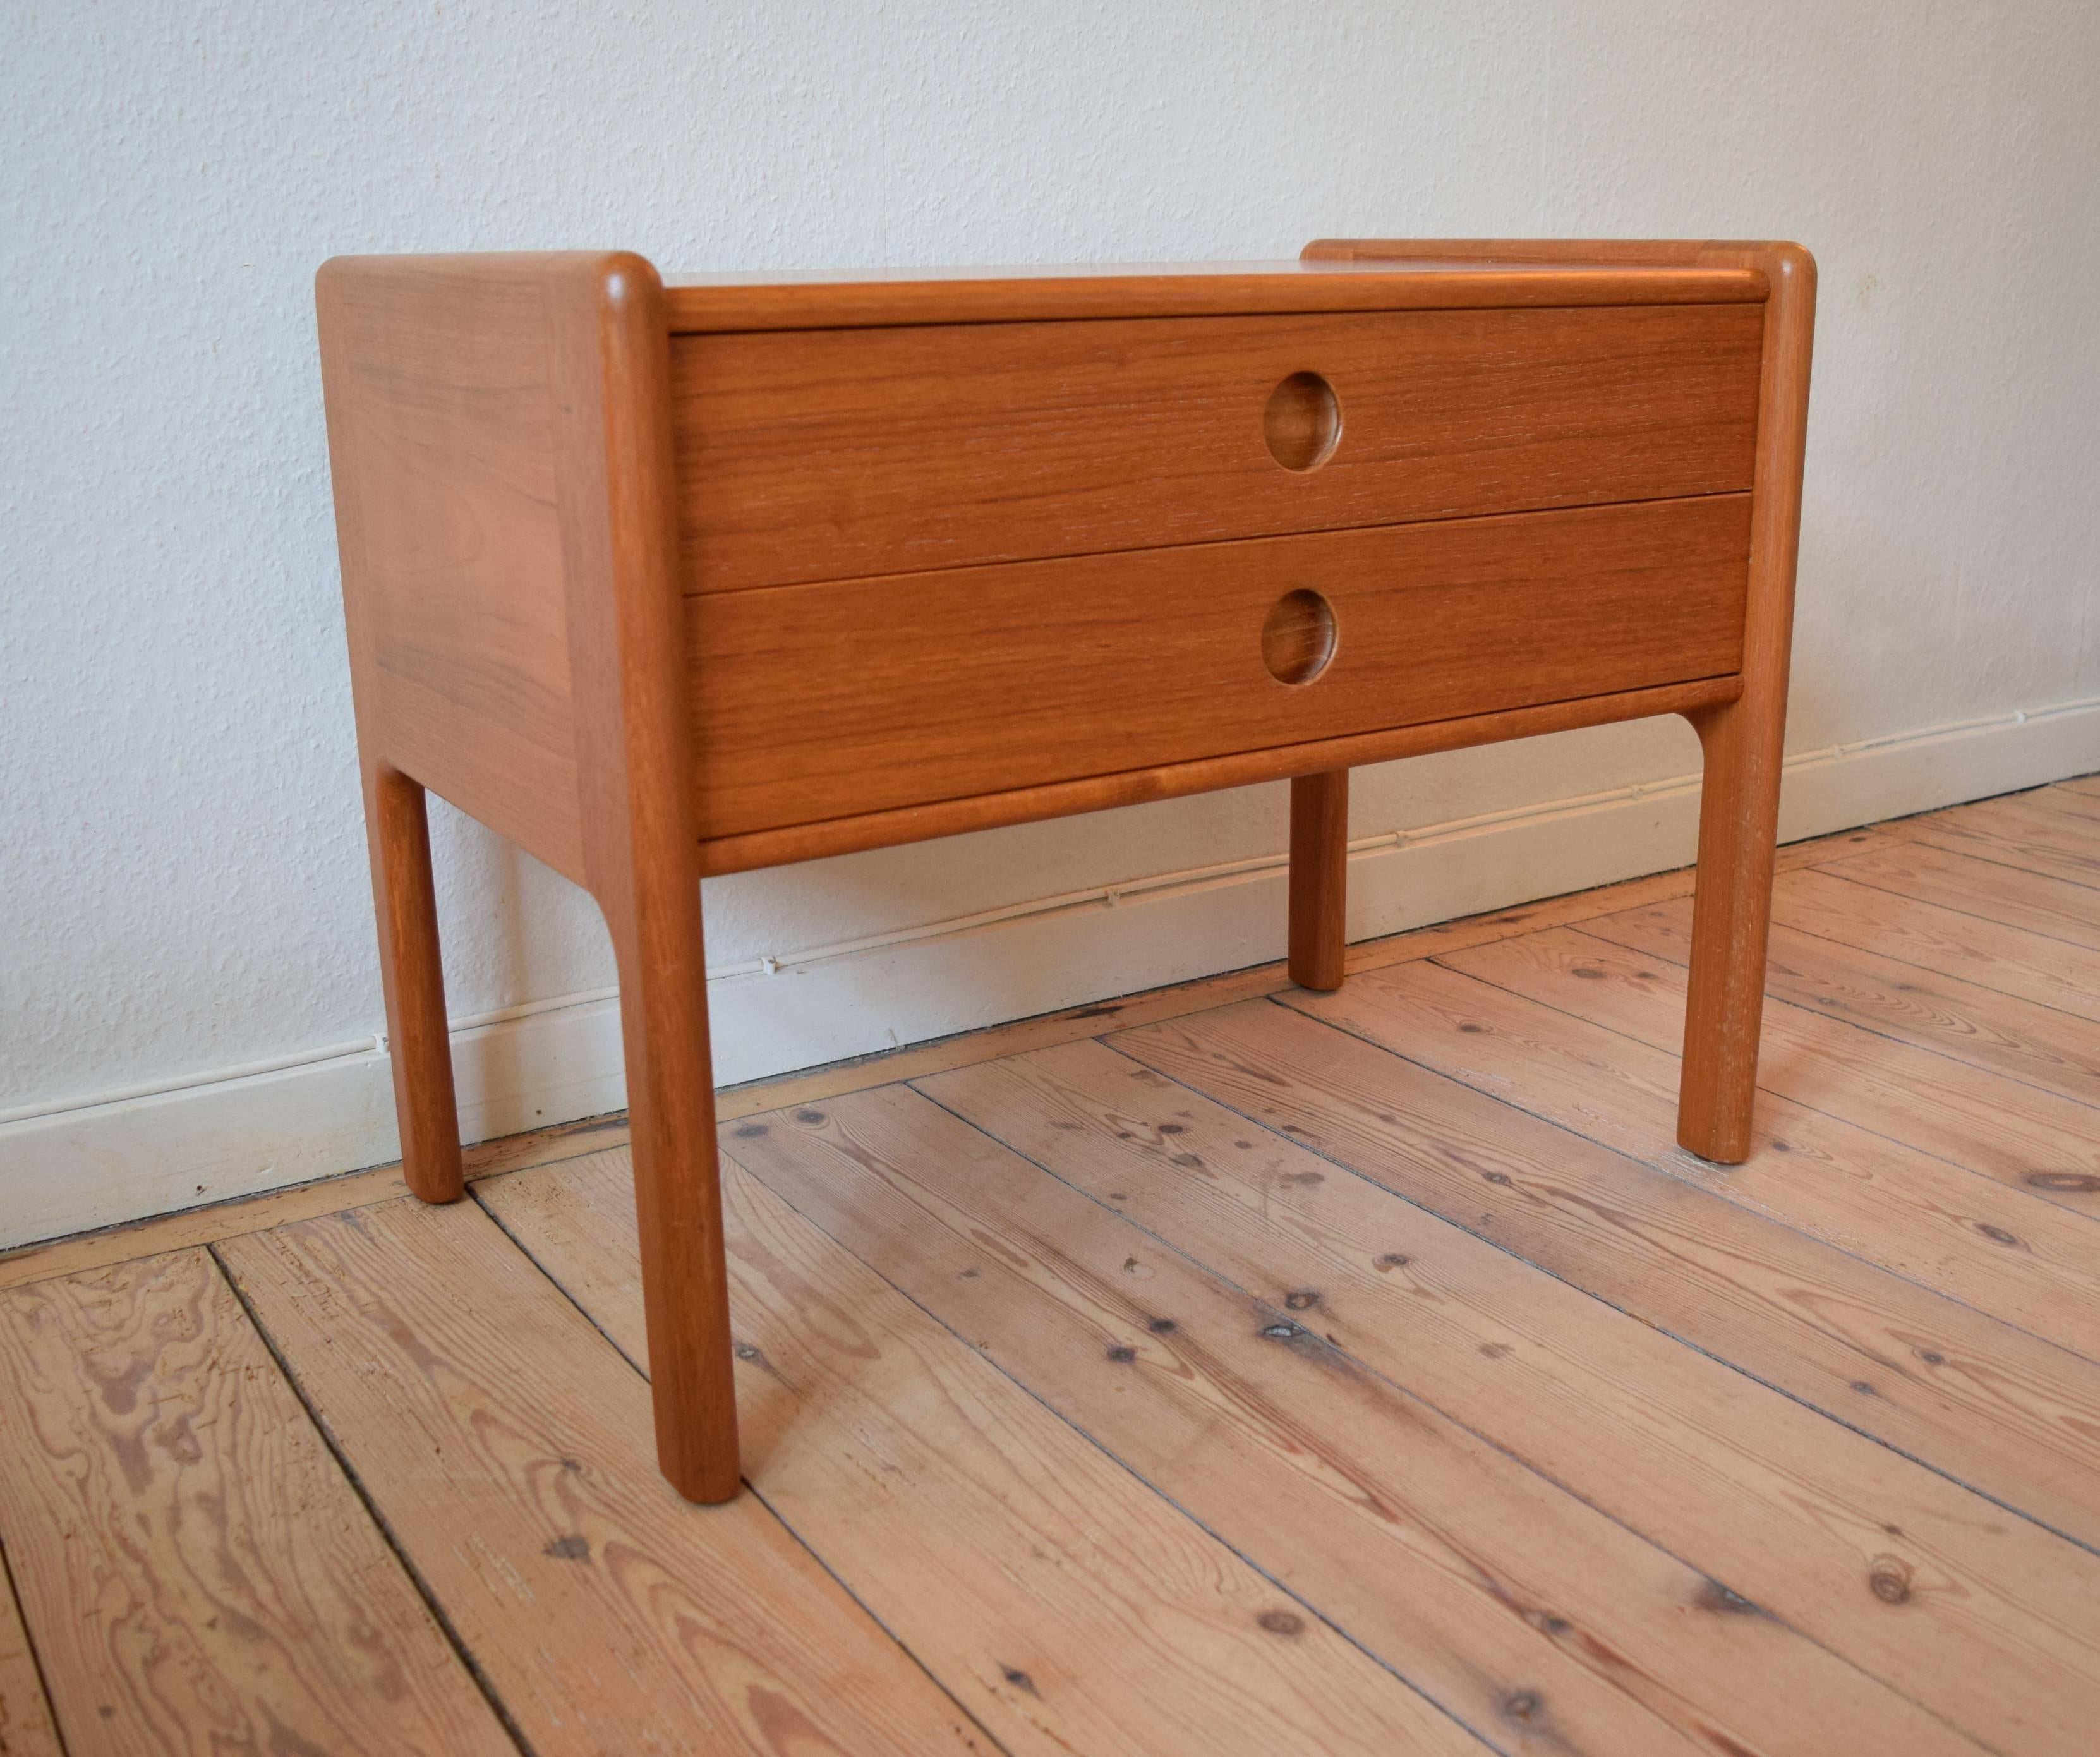 1960s Kai Kristiansen chest of drawers. Features two drawers with inset elliptical pulls and dovetailed drawer joinery. Manufactured by Vildbjerg Møbelfabrik, Denmark. This cabinet is made of teak and has beautiful detailed lines typical for